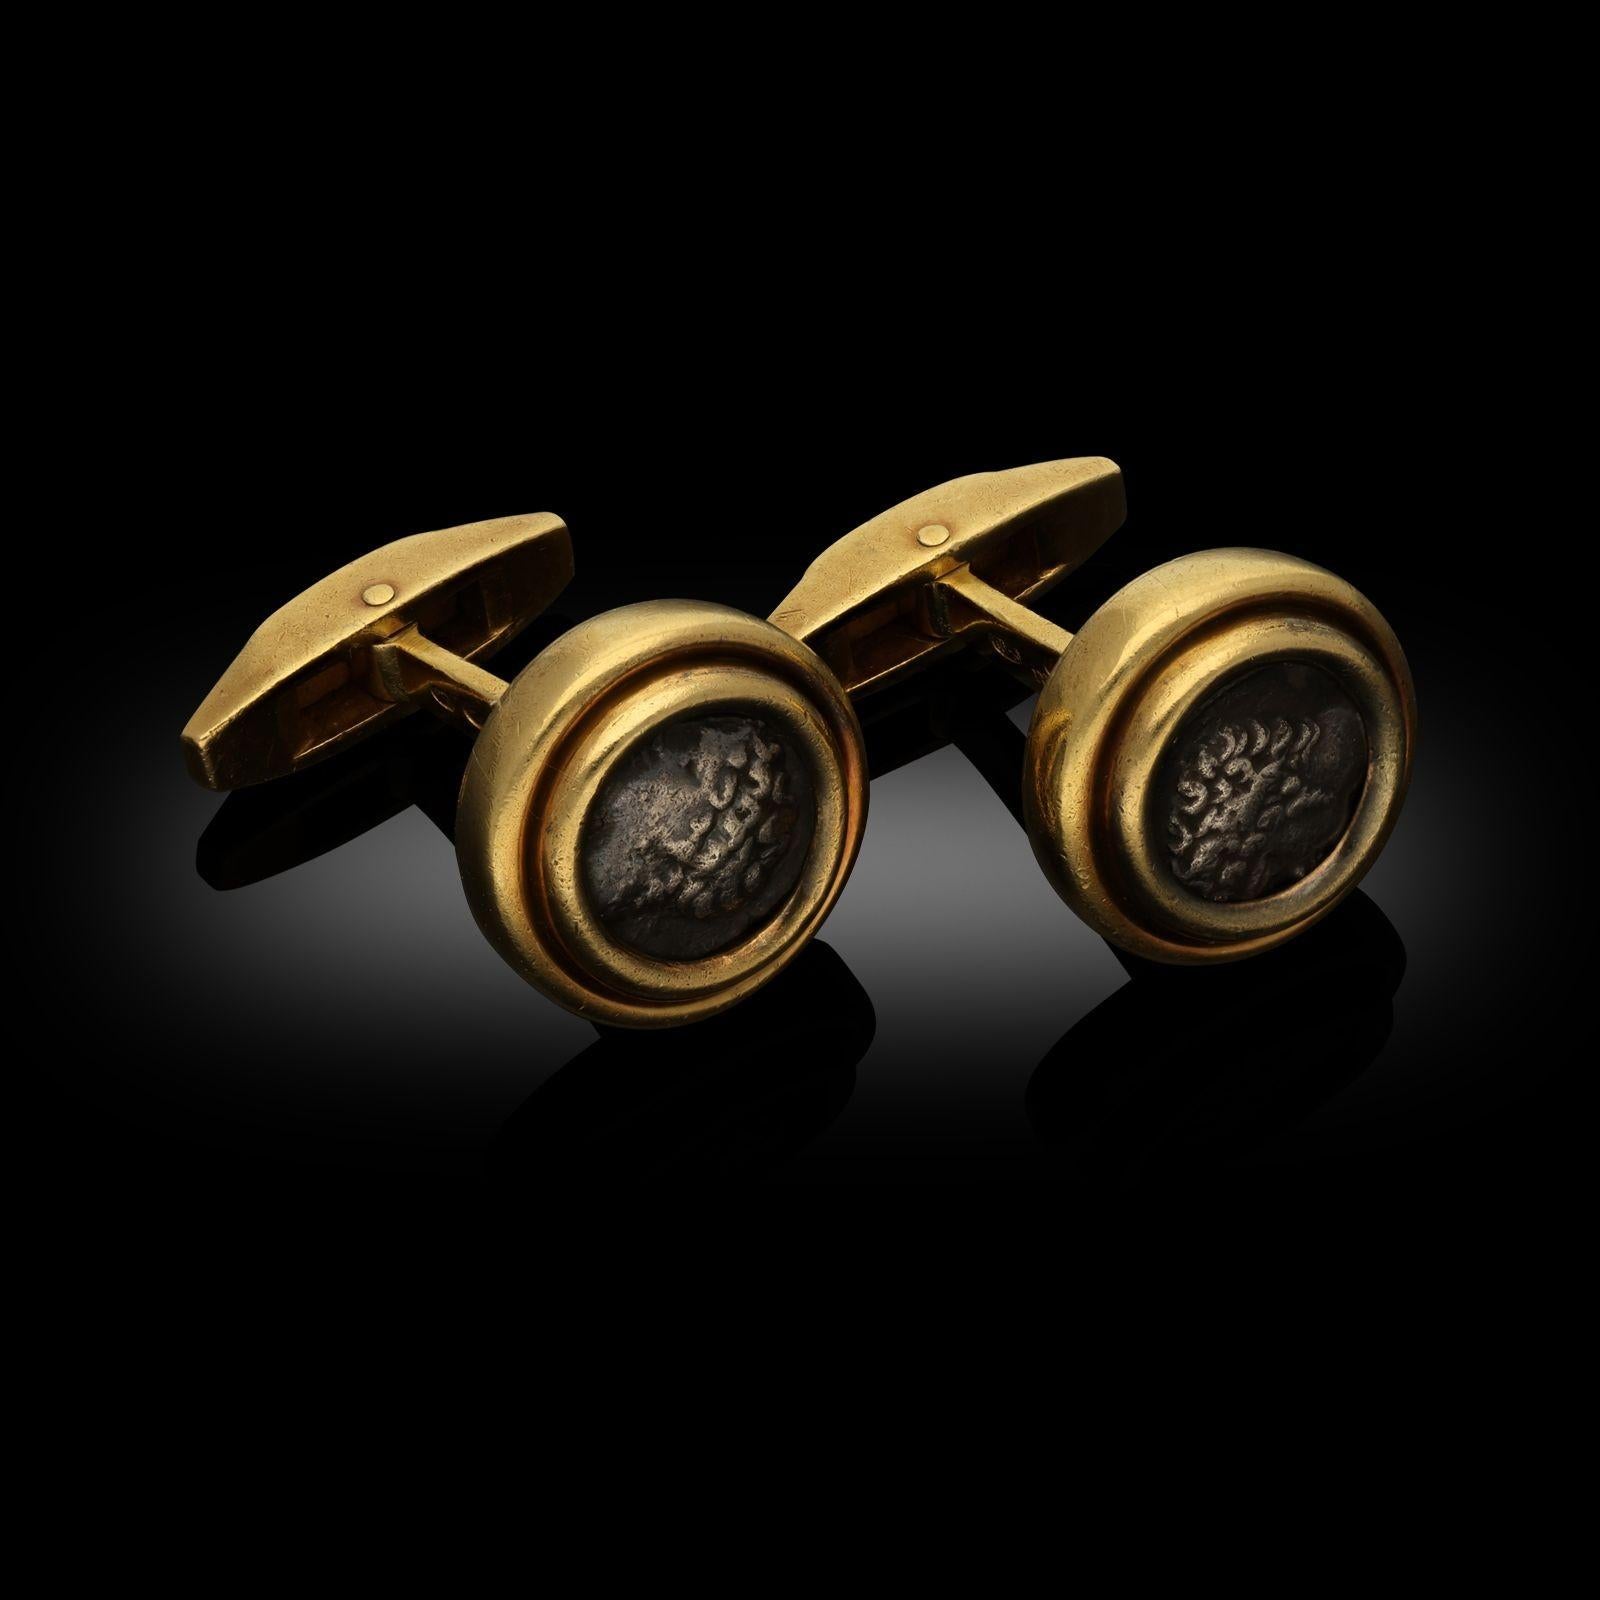 A pair of vintage 'Monete' cufflinks in 18ct yellow gold by Bulgari, circa 1990. These cufflinks are each designed with an ancient silver Gallic coin in a 18ct yellow gold rounded bezel setting and with swivel hinged torpedo backs. The underside of